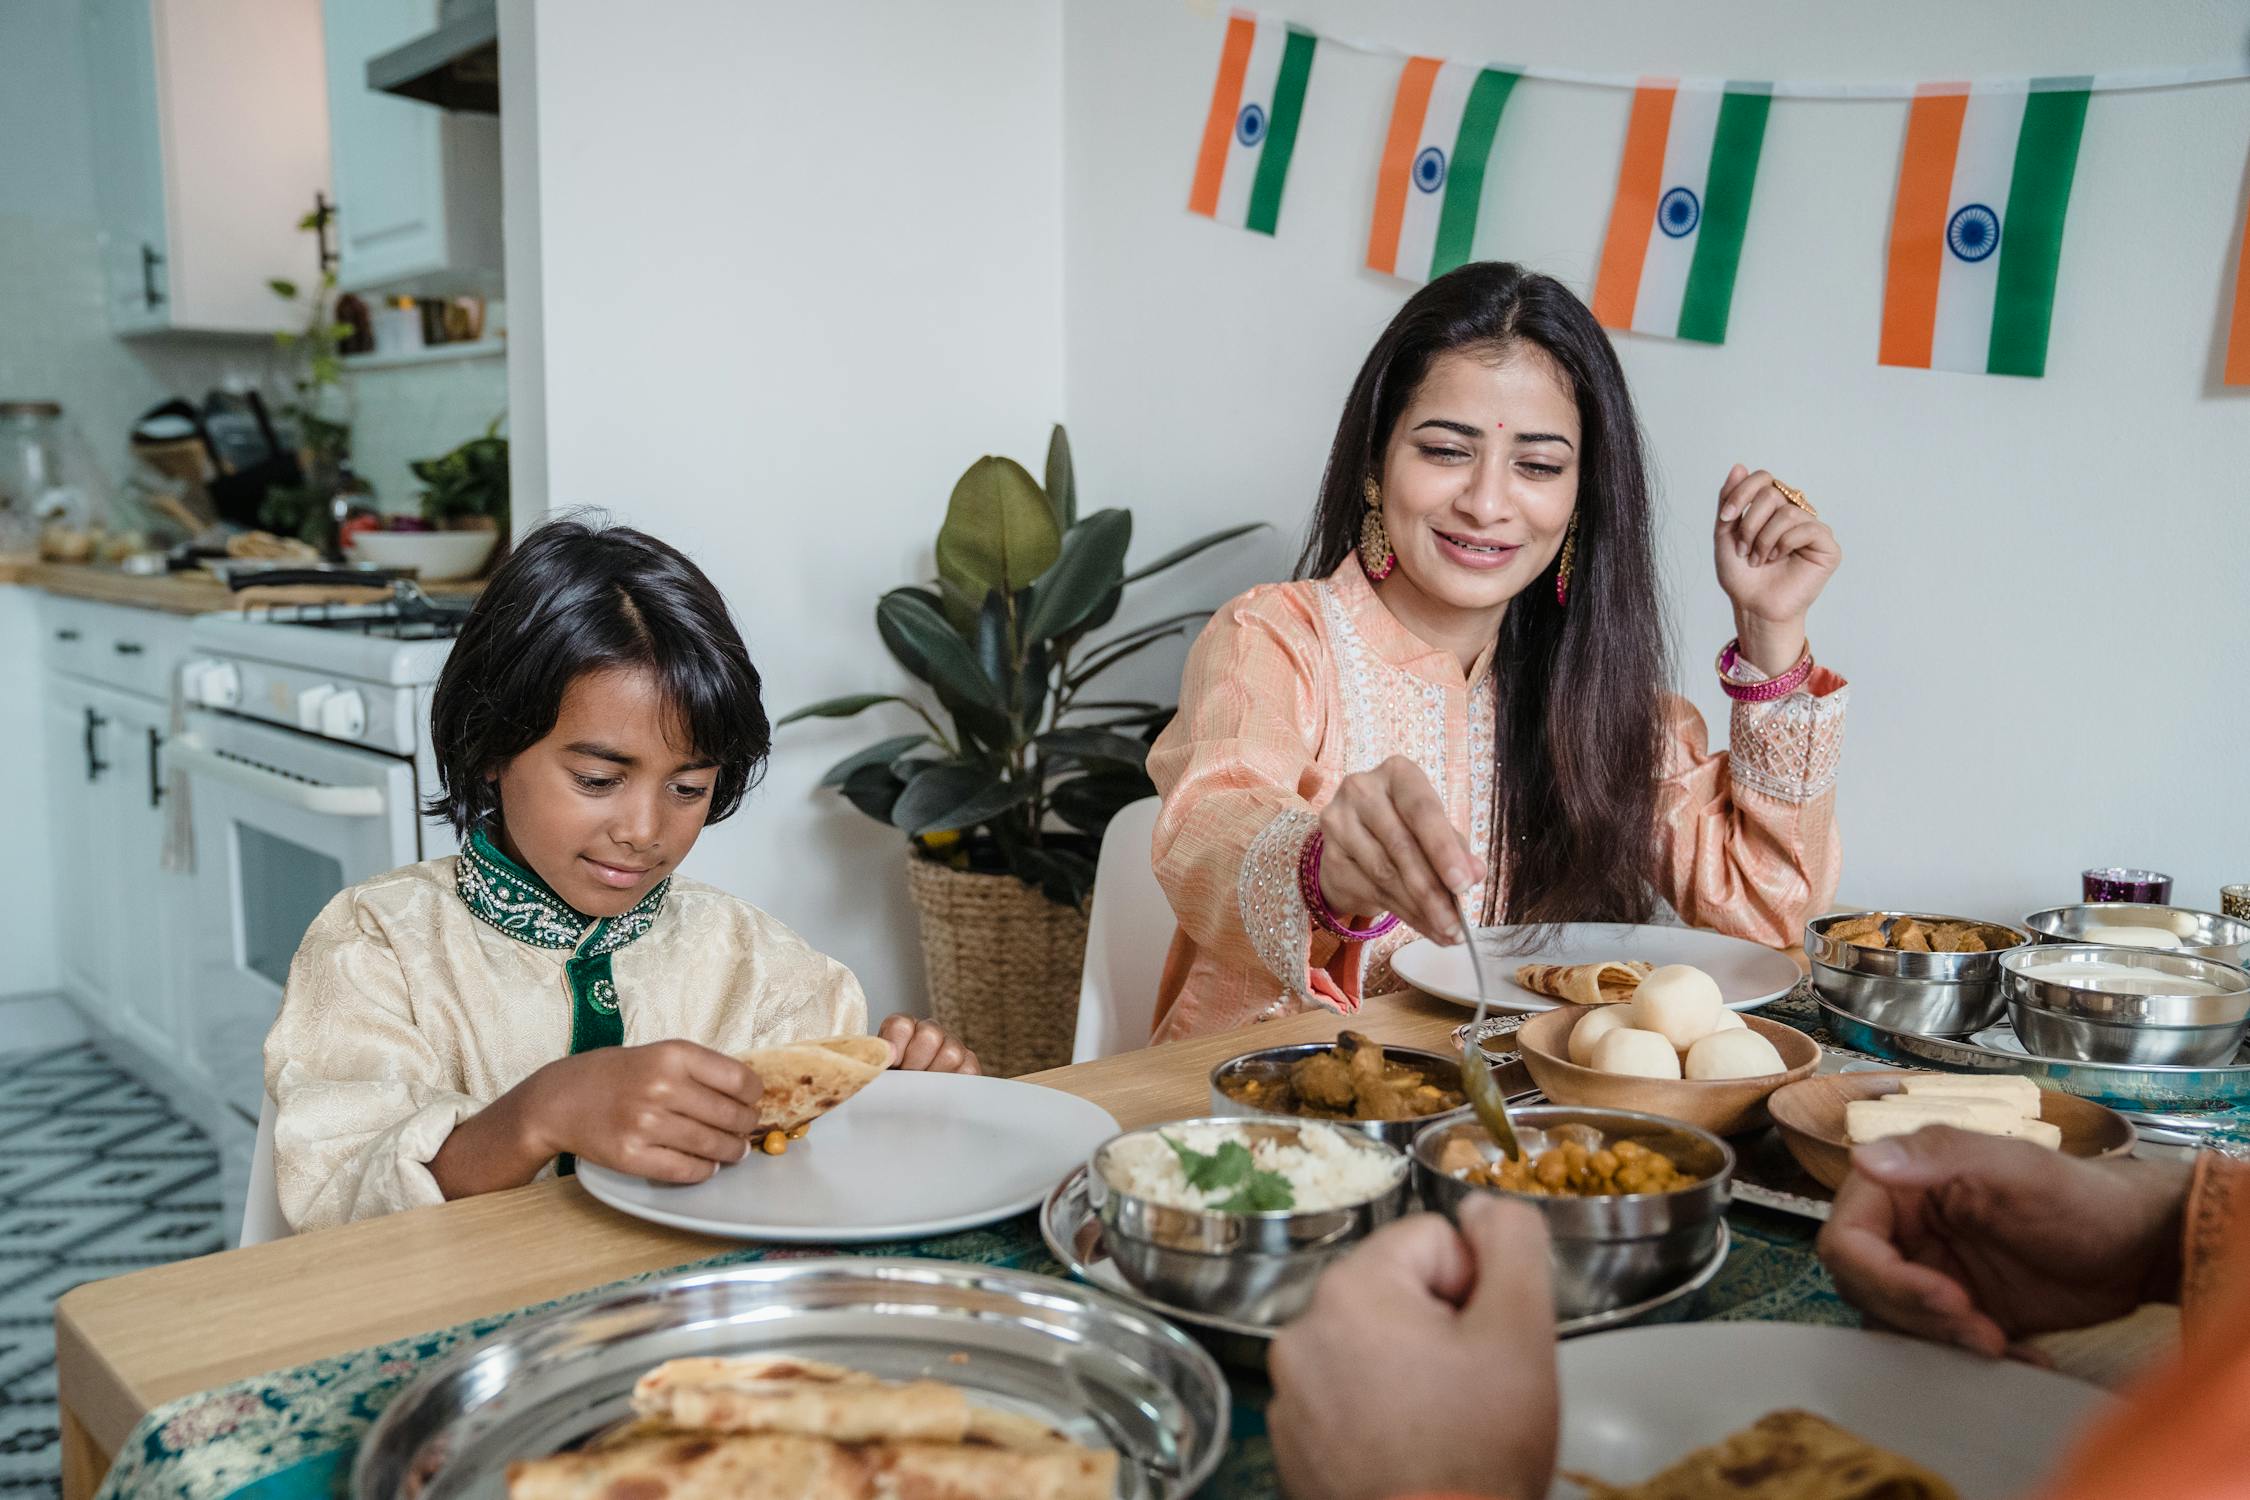 Indian Family Photo by Anna Pou  from Pexels: https://www.pexels.com/photo/woman-in-pink-and-white-floral-long-sleeve-shirt-sitting-beside-woman-in-green-and-white-9345661/